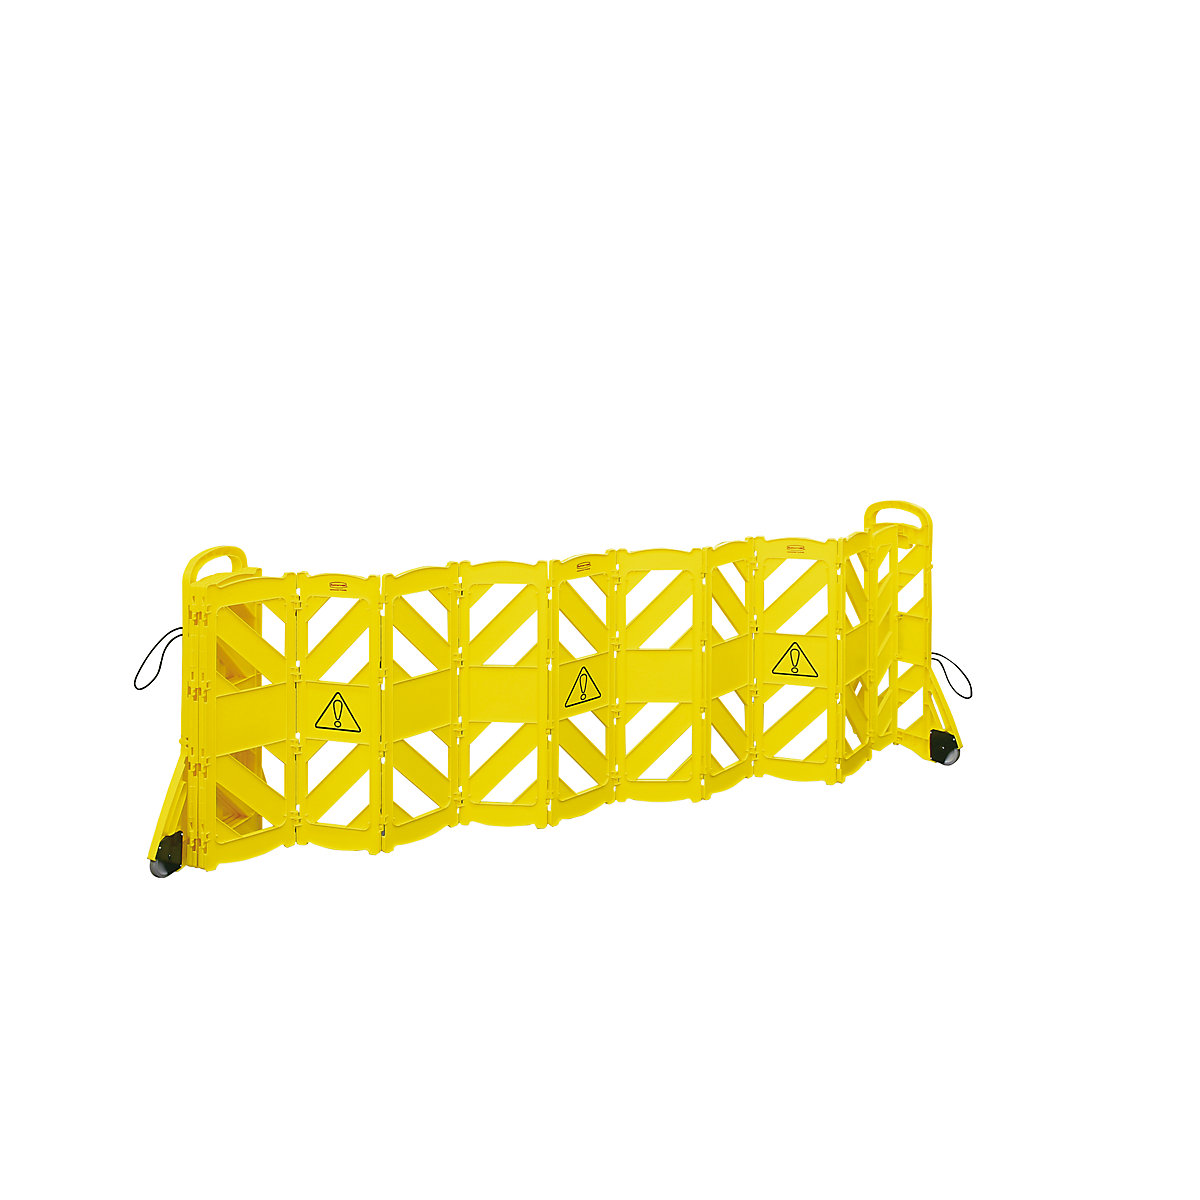 Barrier fence made of polyethylene, mobile - Rubbermaid